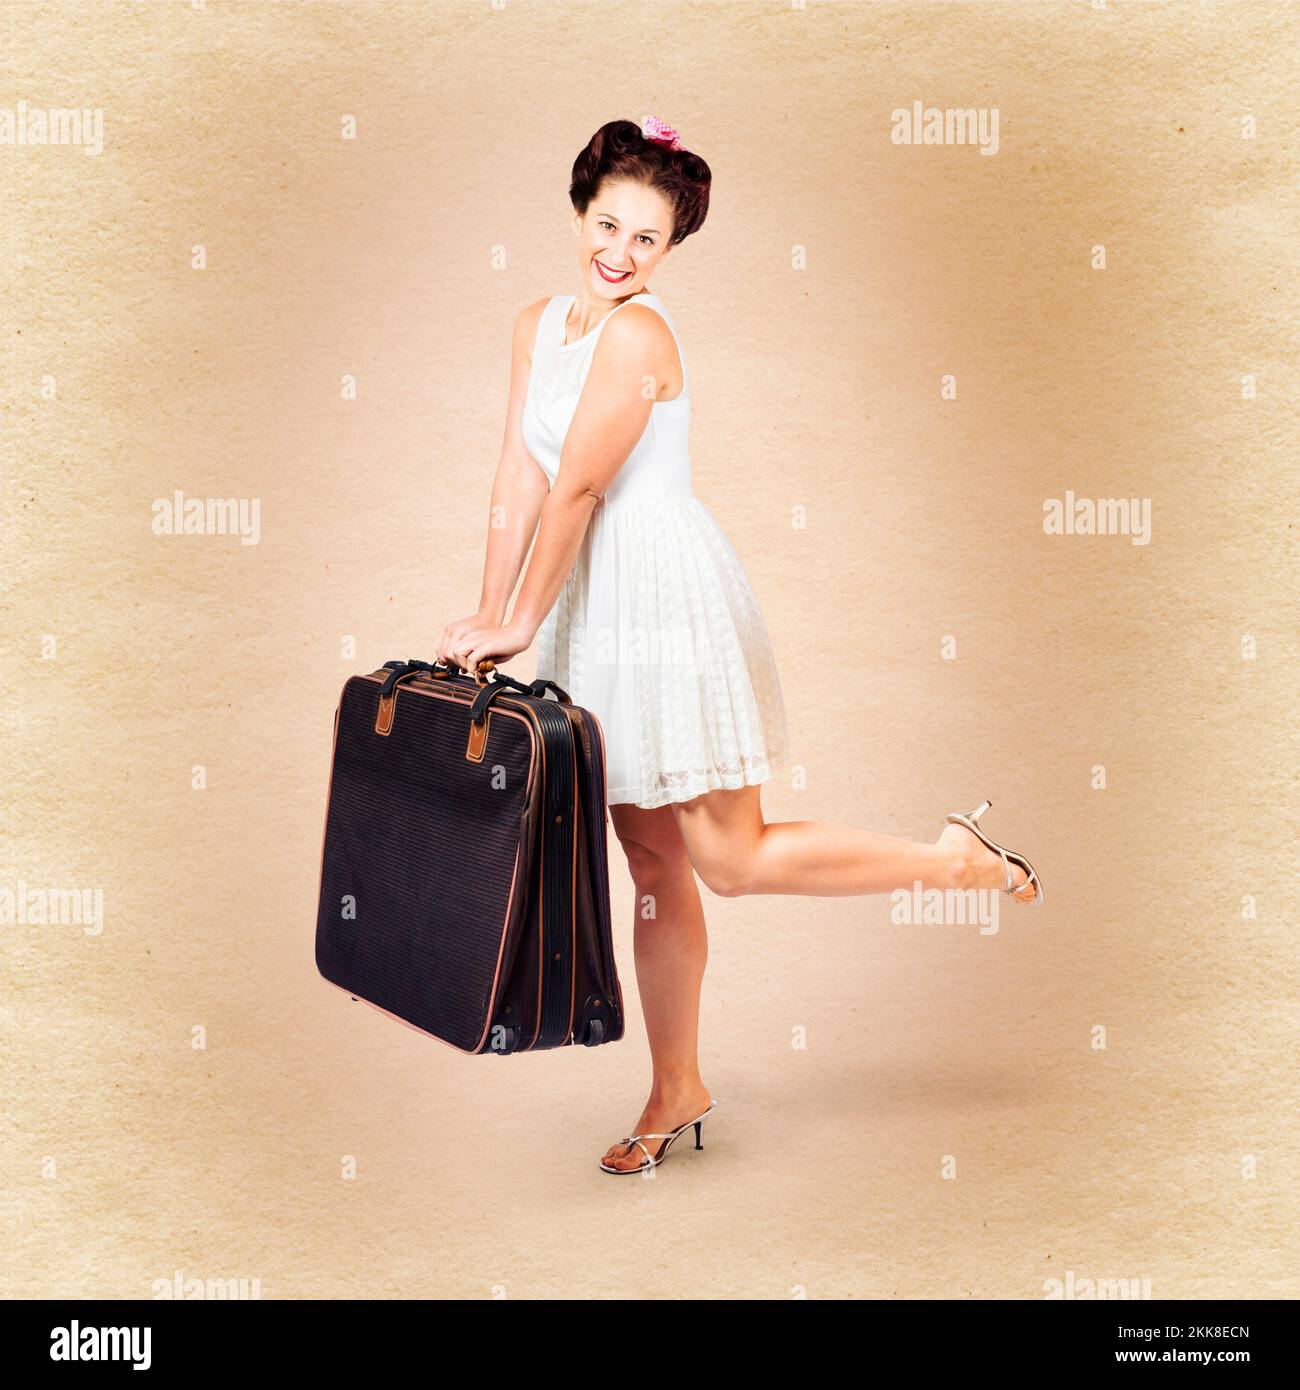 Vintage travel female carrying old fashion suitcase kicking up leg in a square portrait from a retro summer holiday Stock Photo